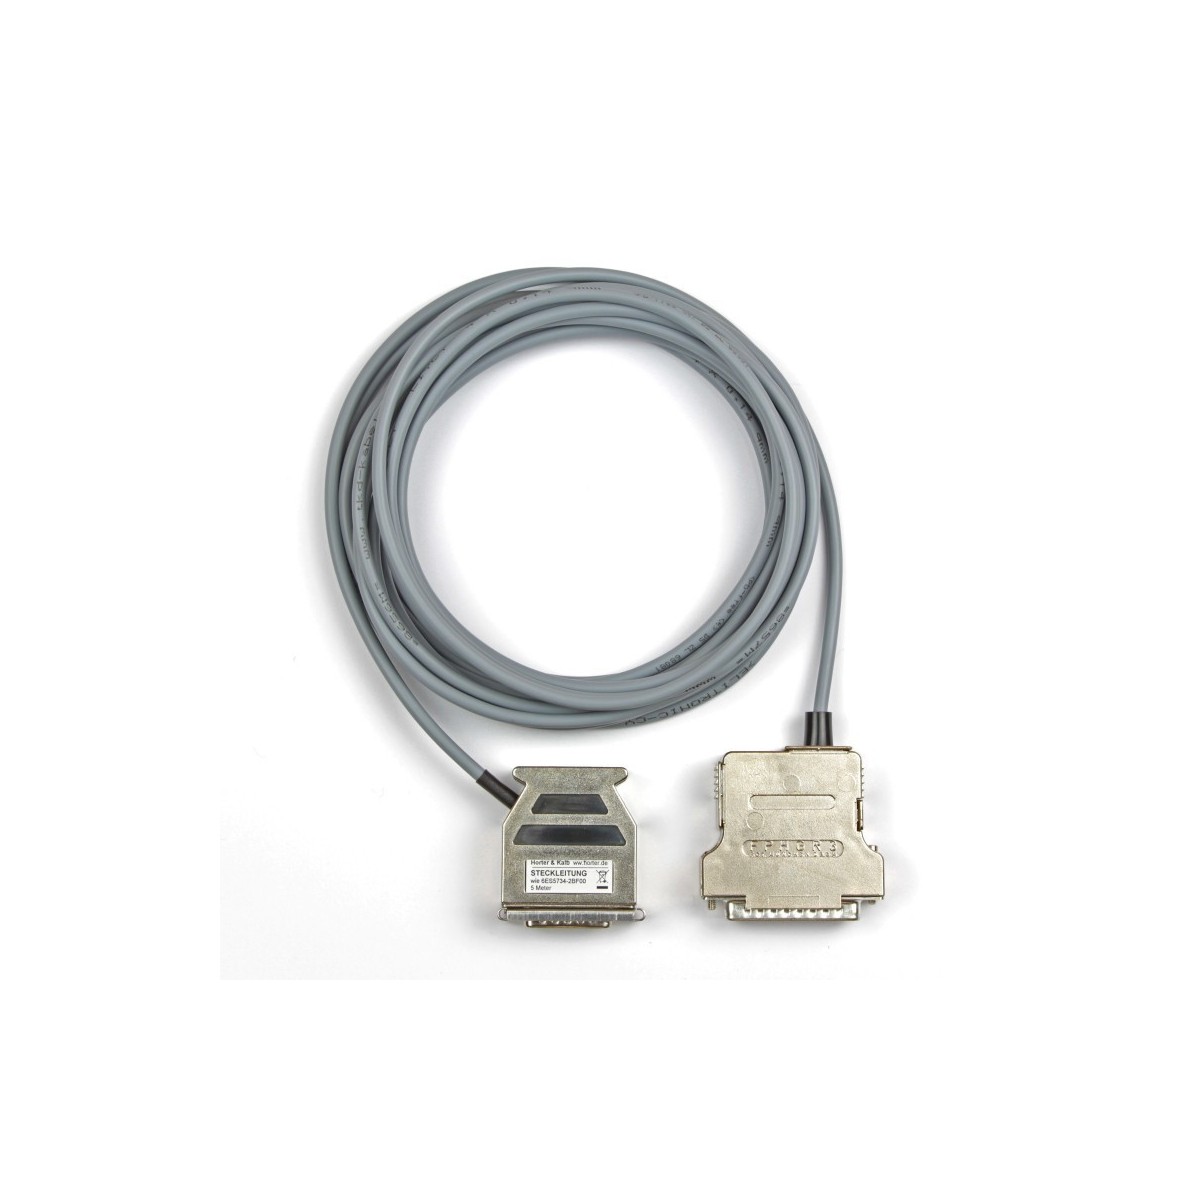 Connection cable PG7xx to S5 CPU 3 meters such as 6ES5734-2BF00